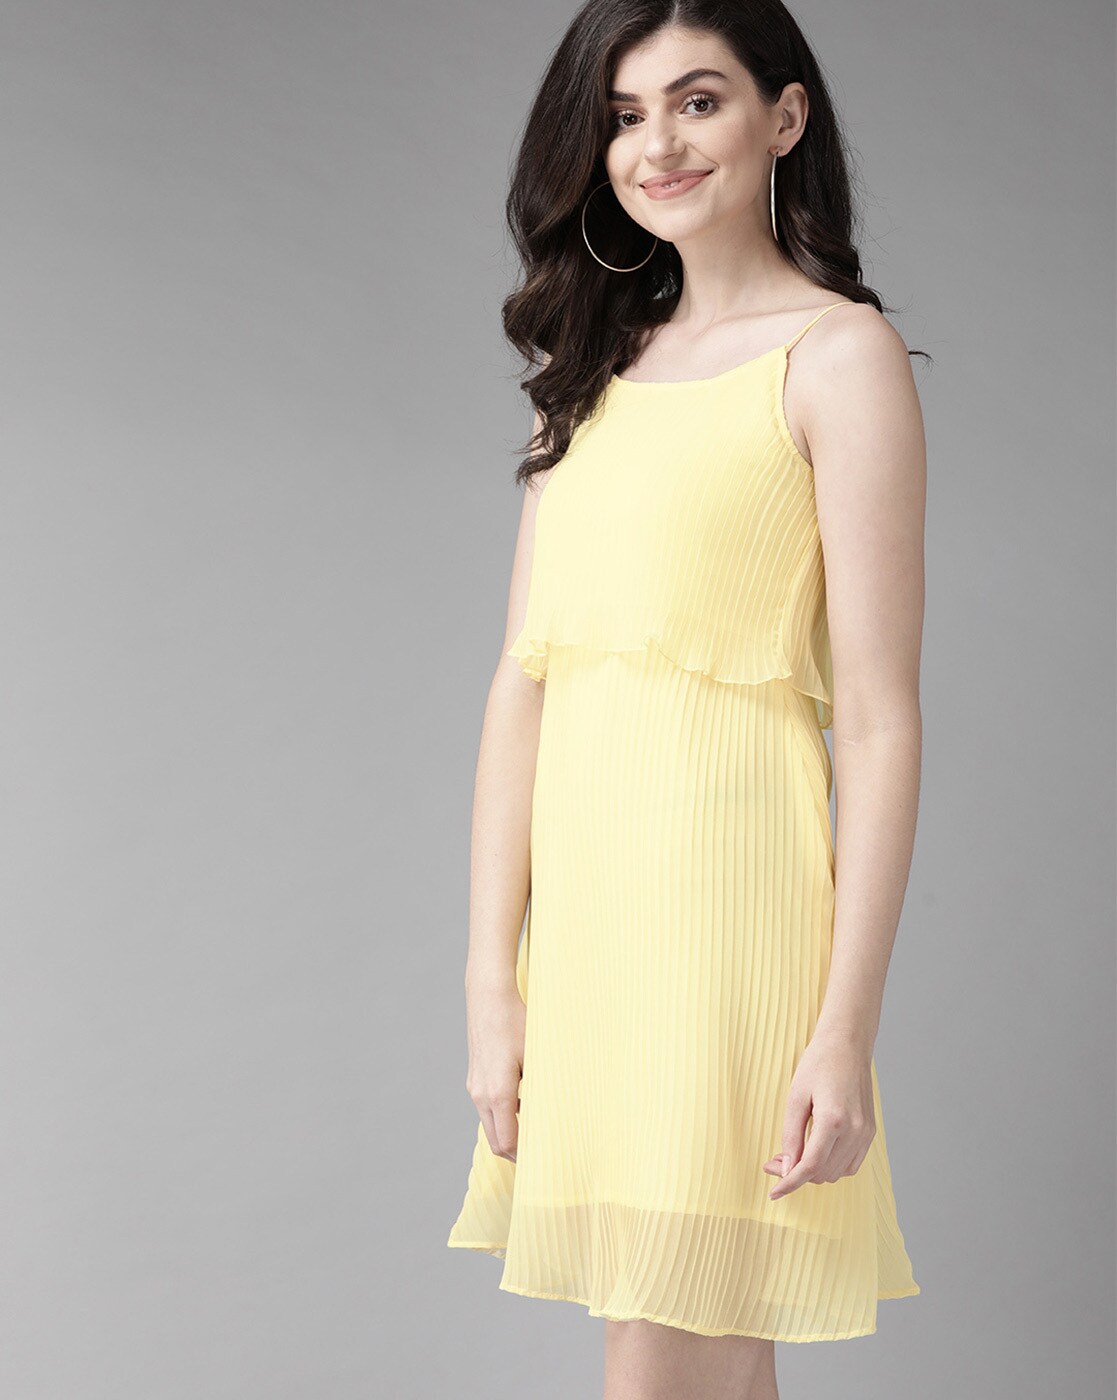 Women's Yellow Evening Dresses gifts - up to −80% | Stylight